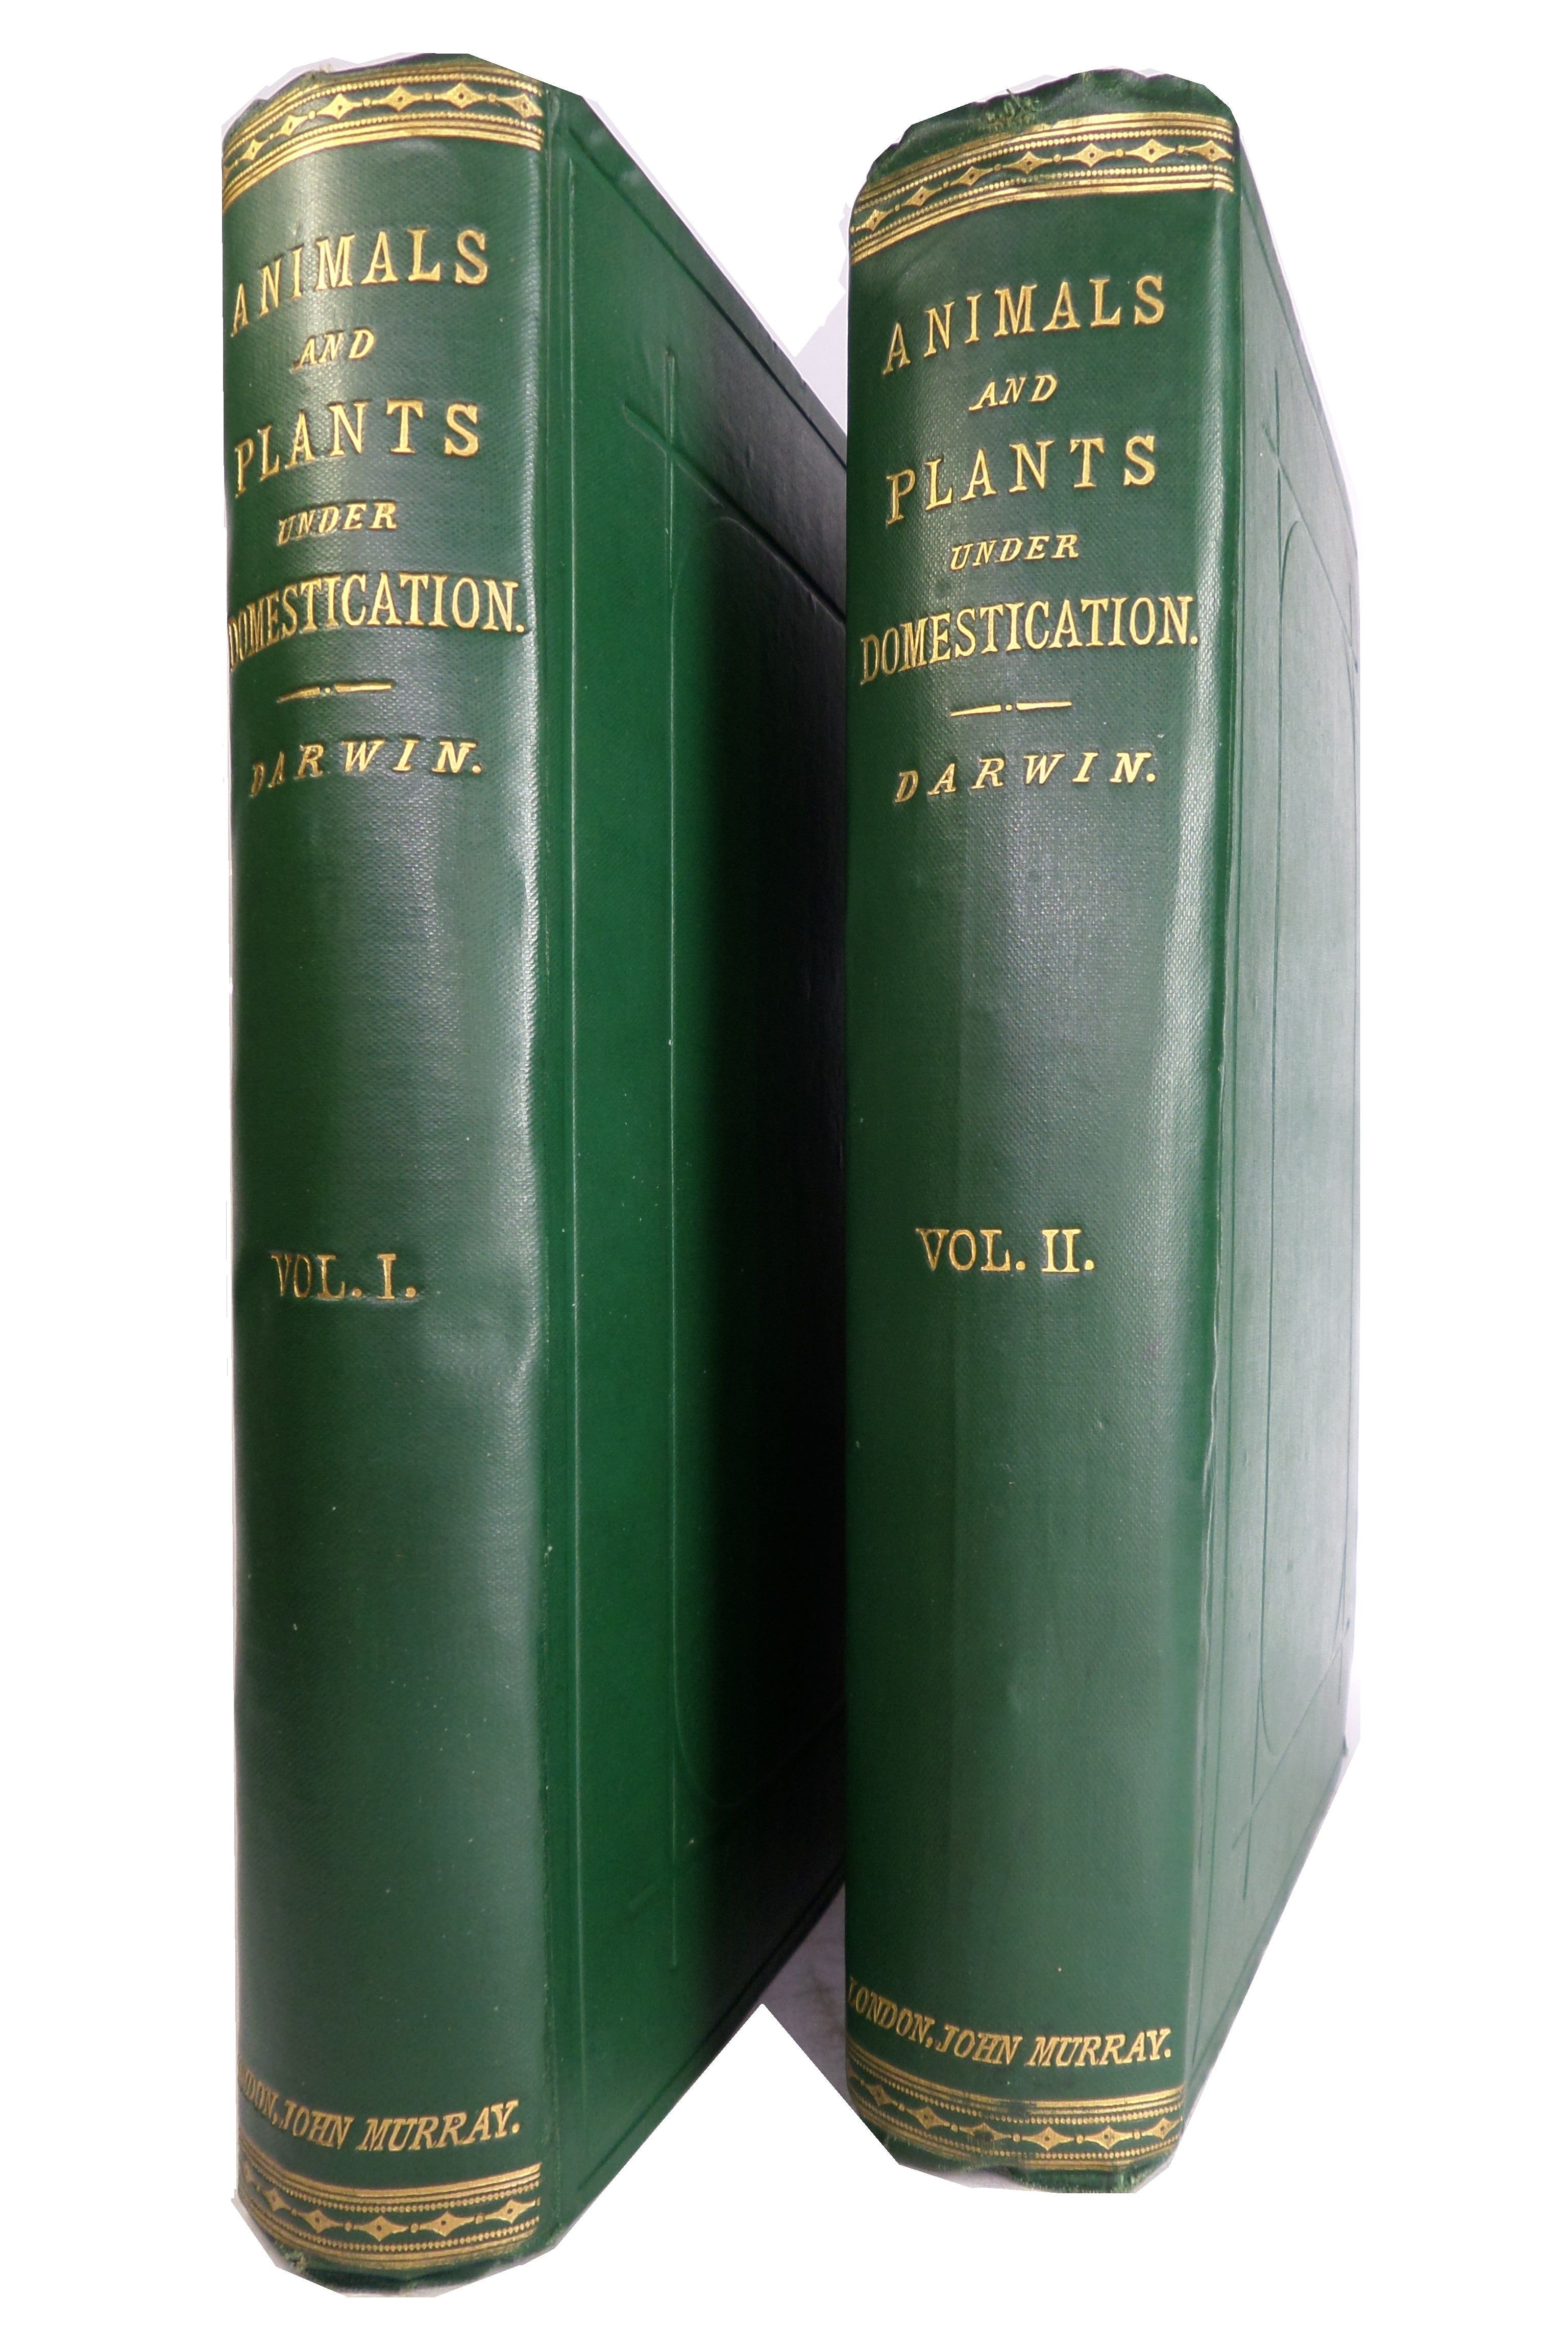 VARIATION OF ANIMALS & PLANTS UNDER DOMESTICATION BY CHARLES DARWIN 1868 FIRST EDITION, FIRST IMPRESSION